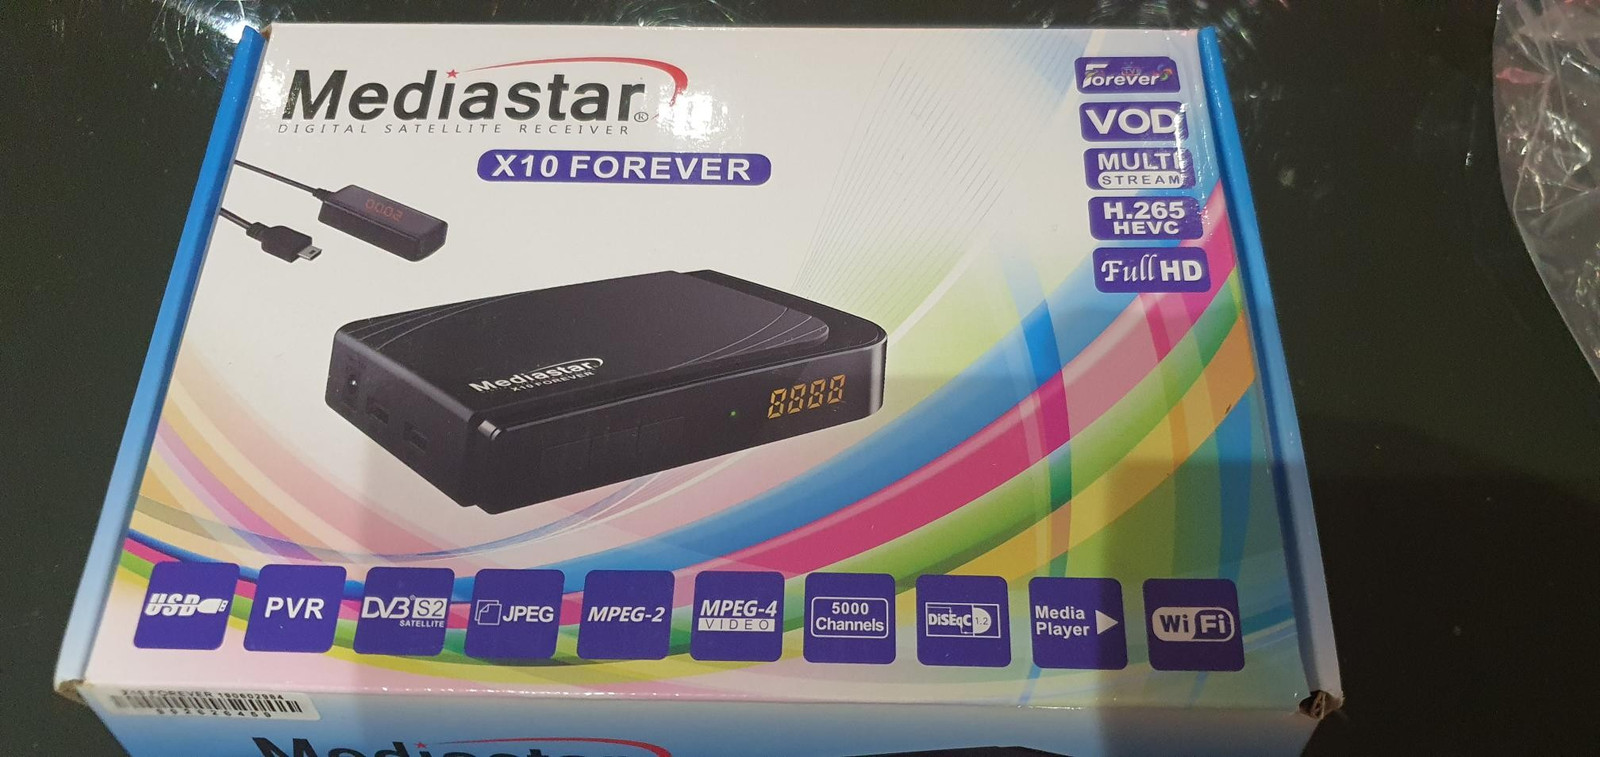 Mediastar X10 FOREVER Decoder with Remote Control